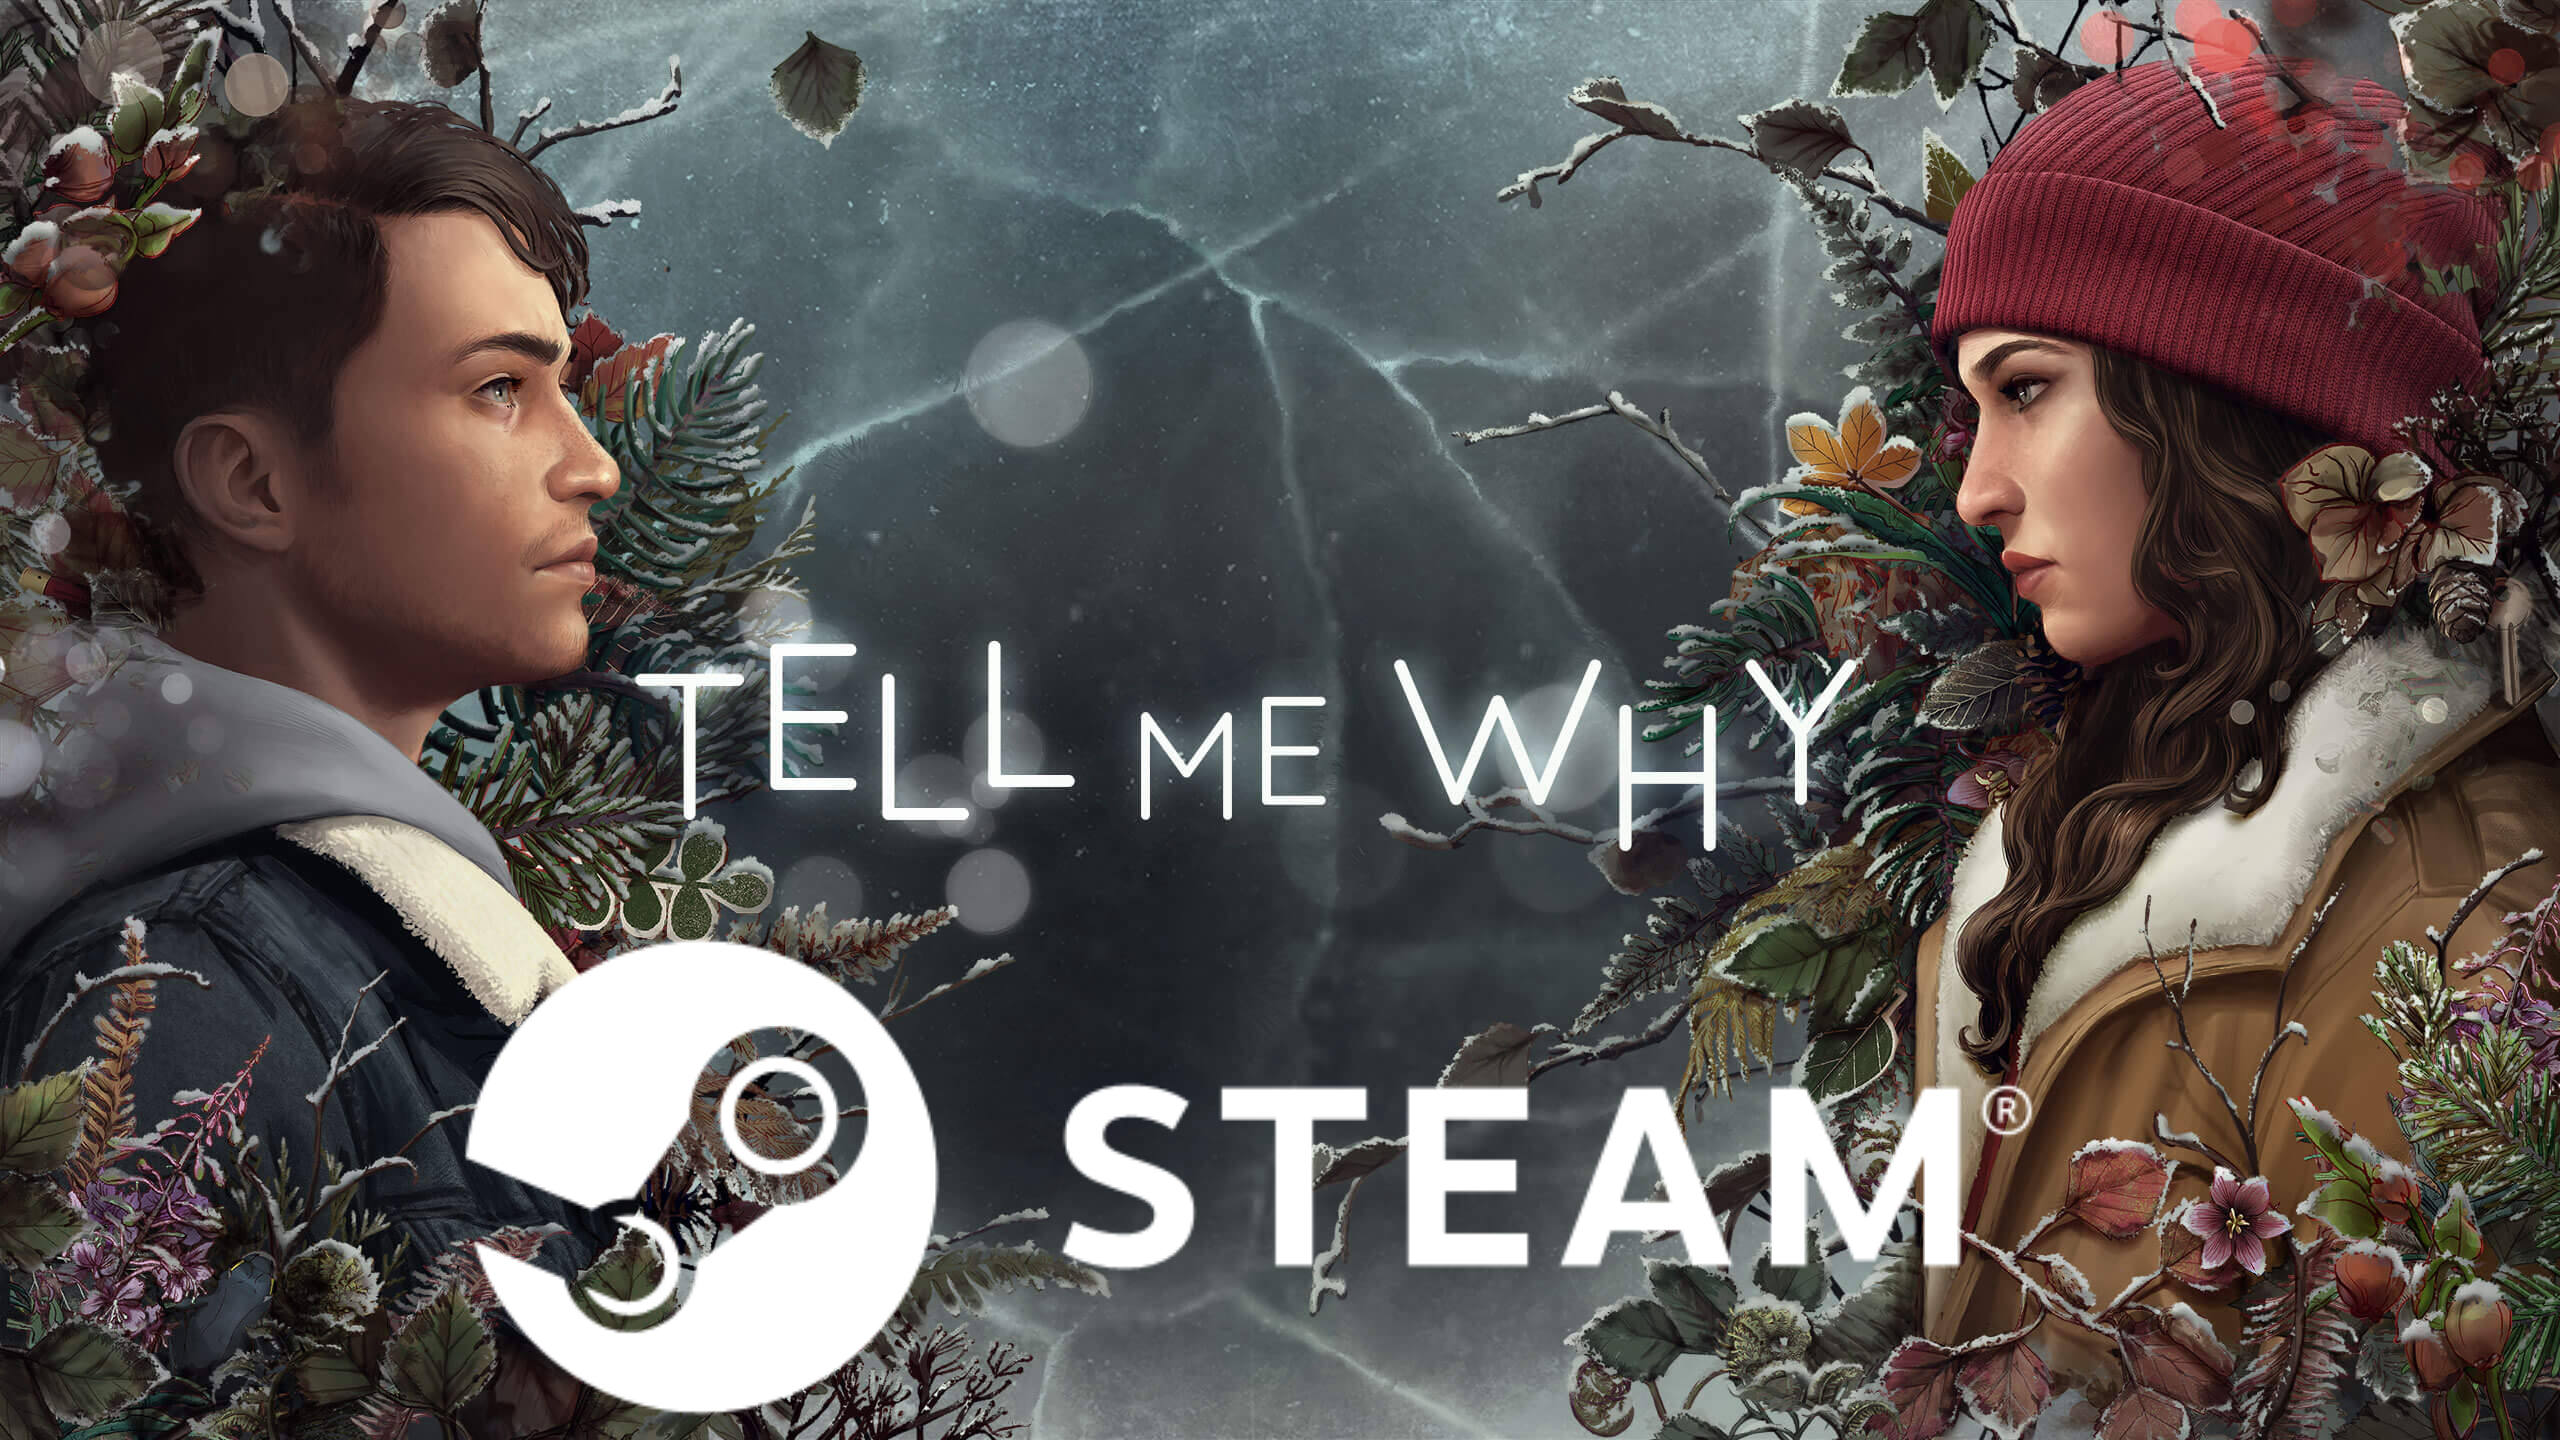 Tell me why (игра). Tell me why обложка. Tell me why Steam. Tell me why игра любовные линии.